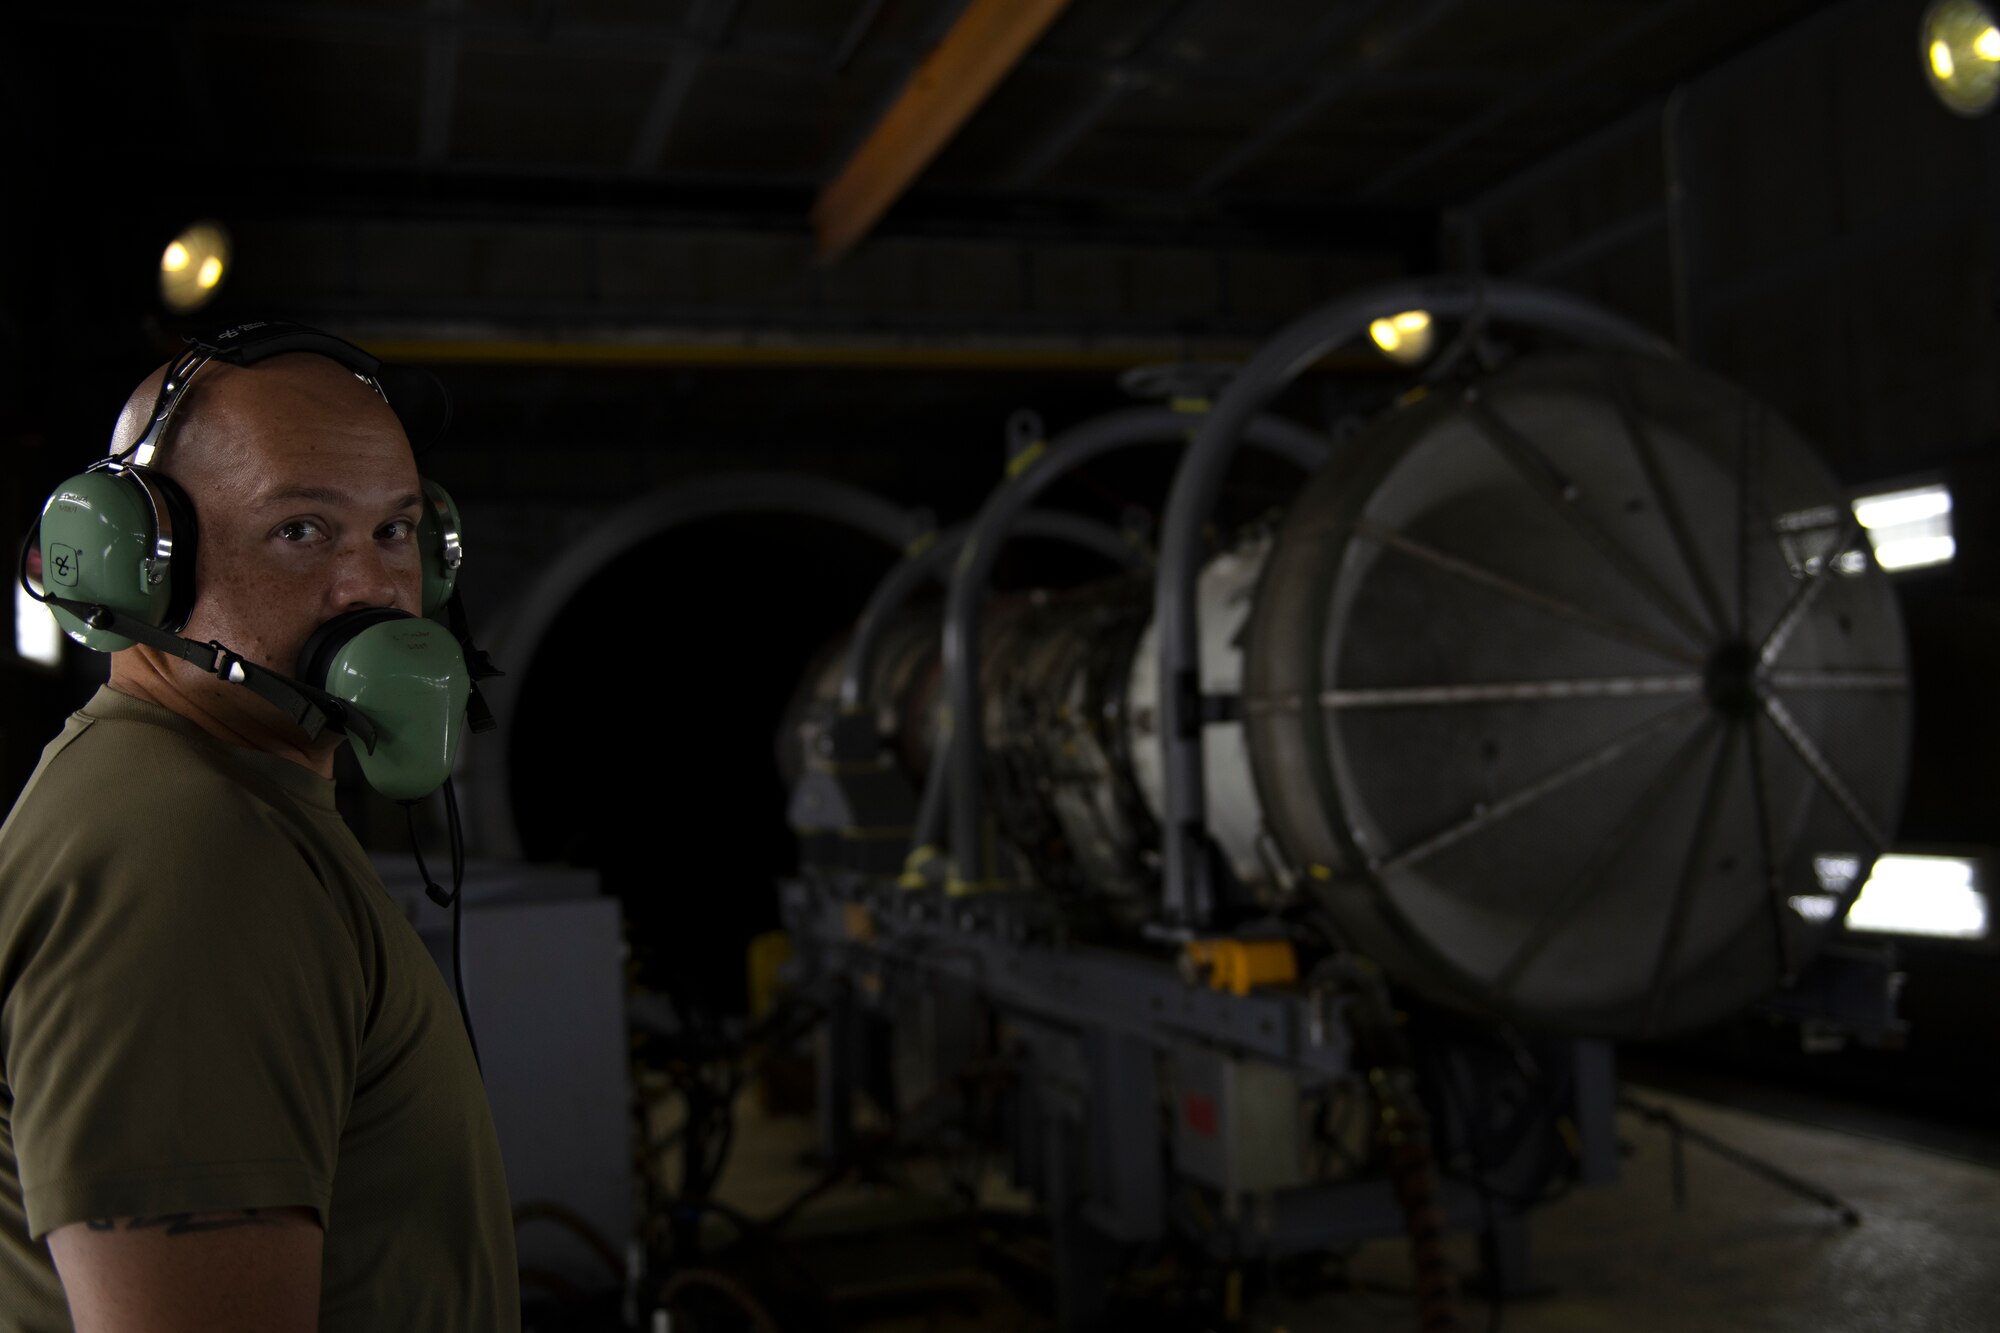 U.S. Air Force Staff Sgt. Wallace Winkler, 18th Component Maintenance Squadron test cell craftsman, prepares to conduct an engine run inside the test cell at Kadena Air Base, Japan, Aug. 25, 2022. The engine test cell enables maintenance personnel to safely test uninstalled aircraft engines under actual load conditions. (U.S. Air Force photo by Senior Airman Jessi Roth)